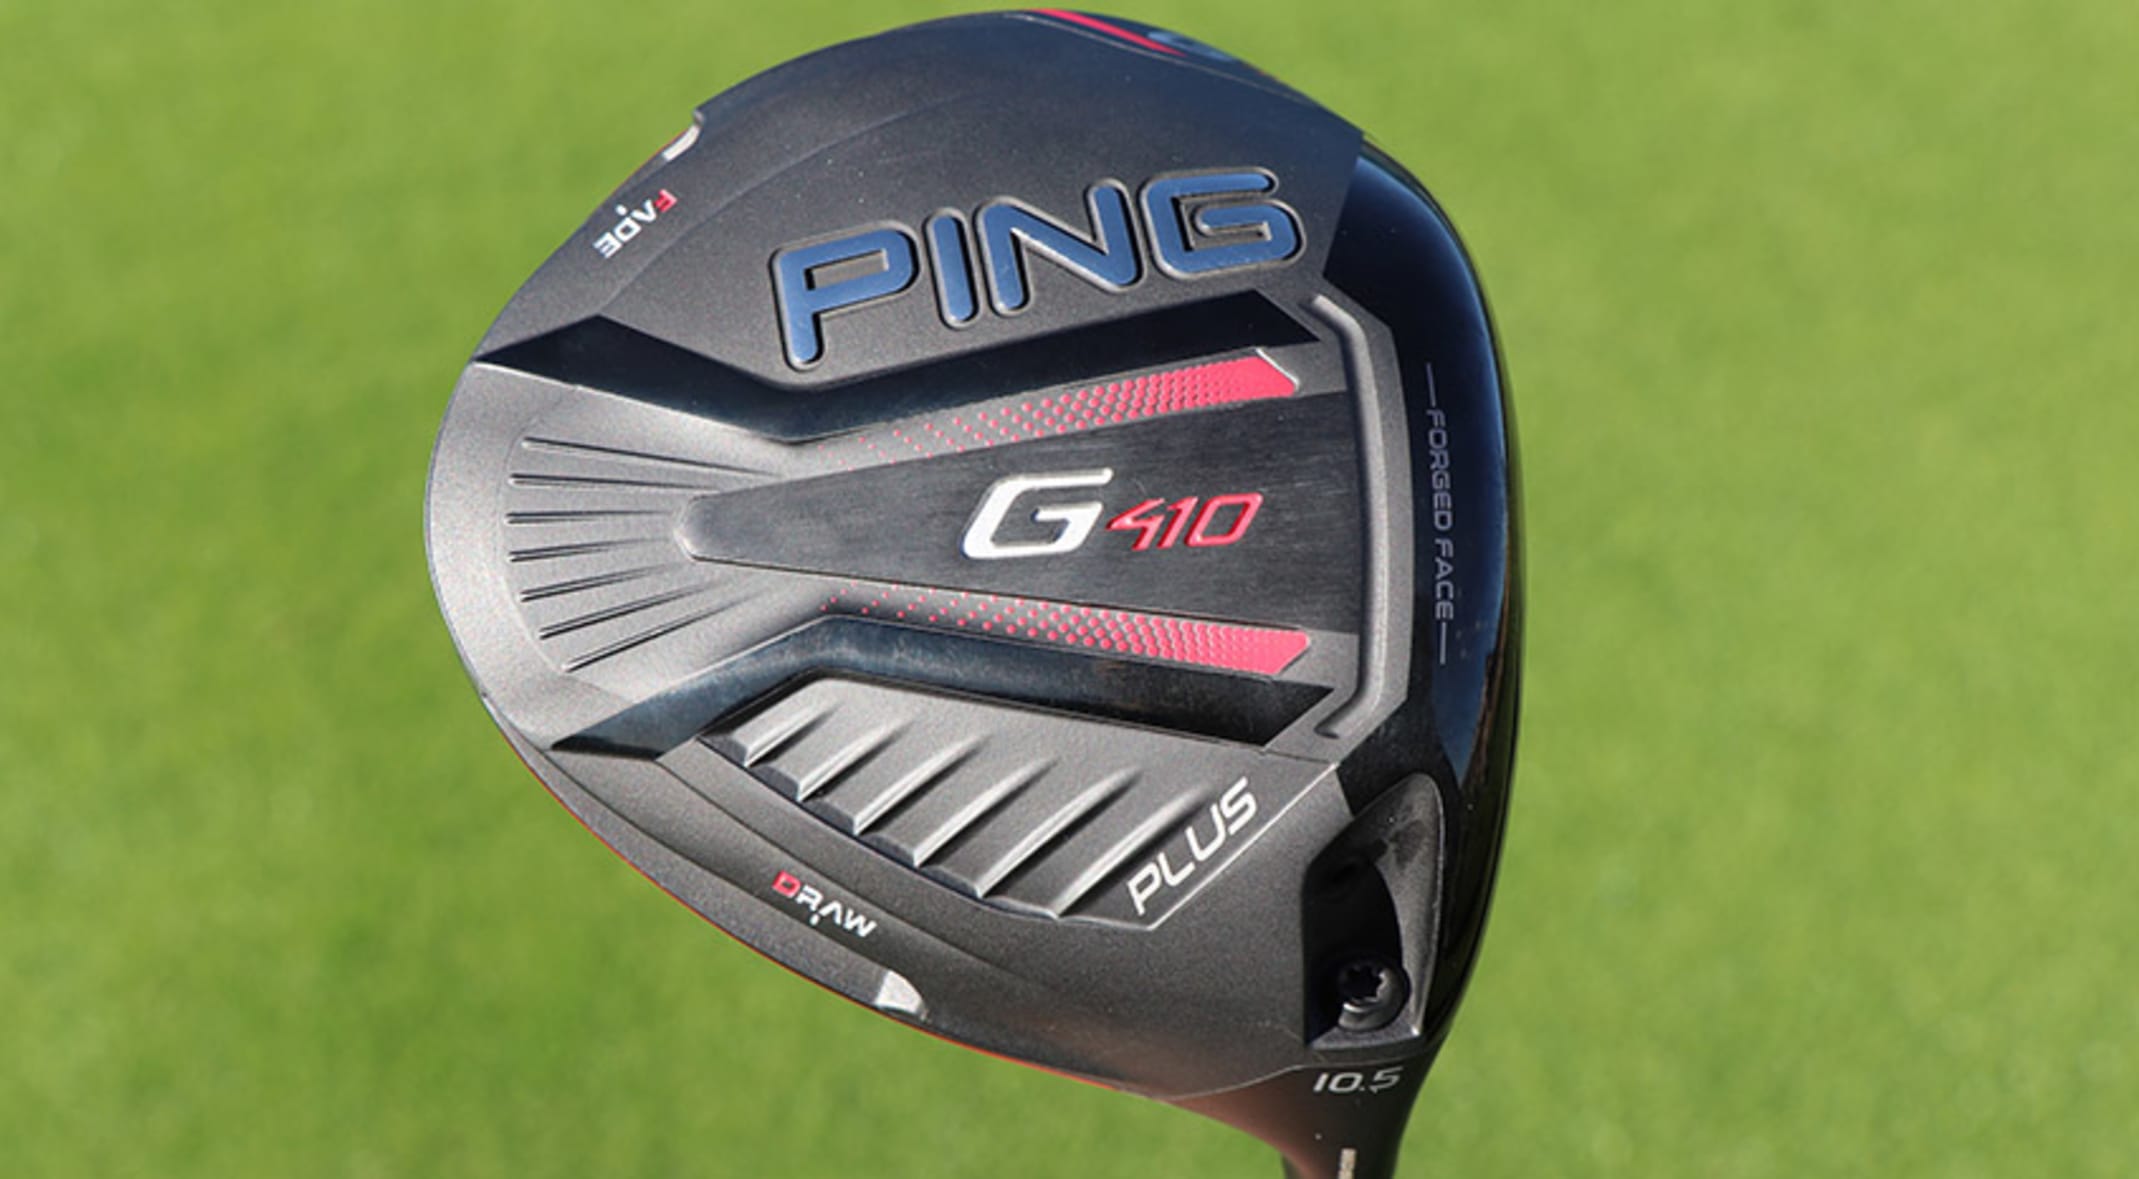 Ping launches its new G410 drivers, featuring a weight-adjustable version